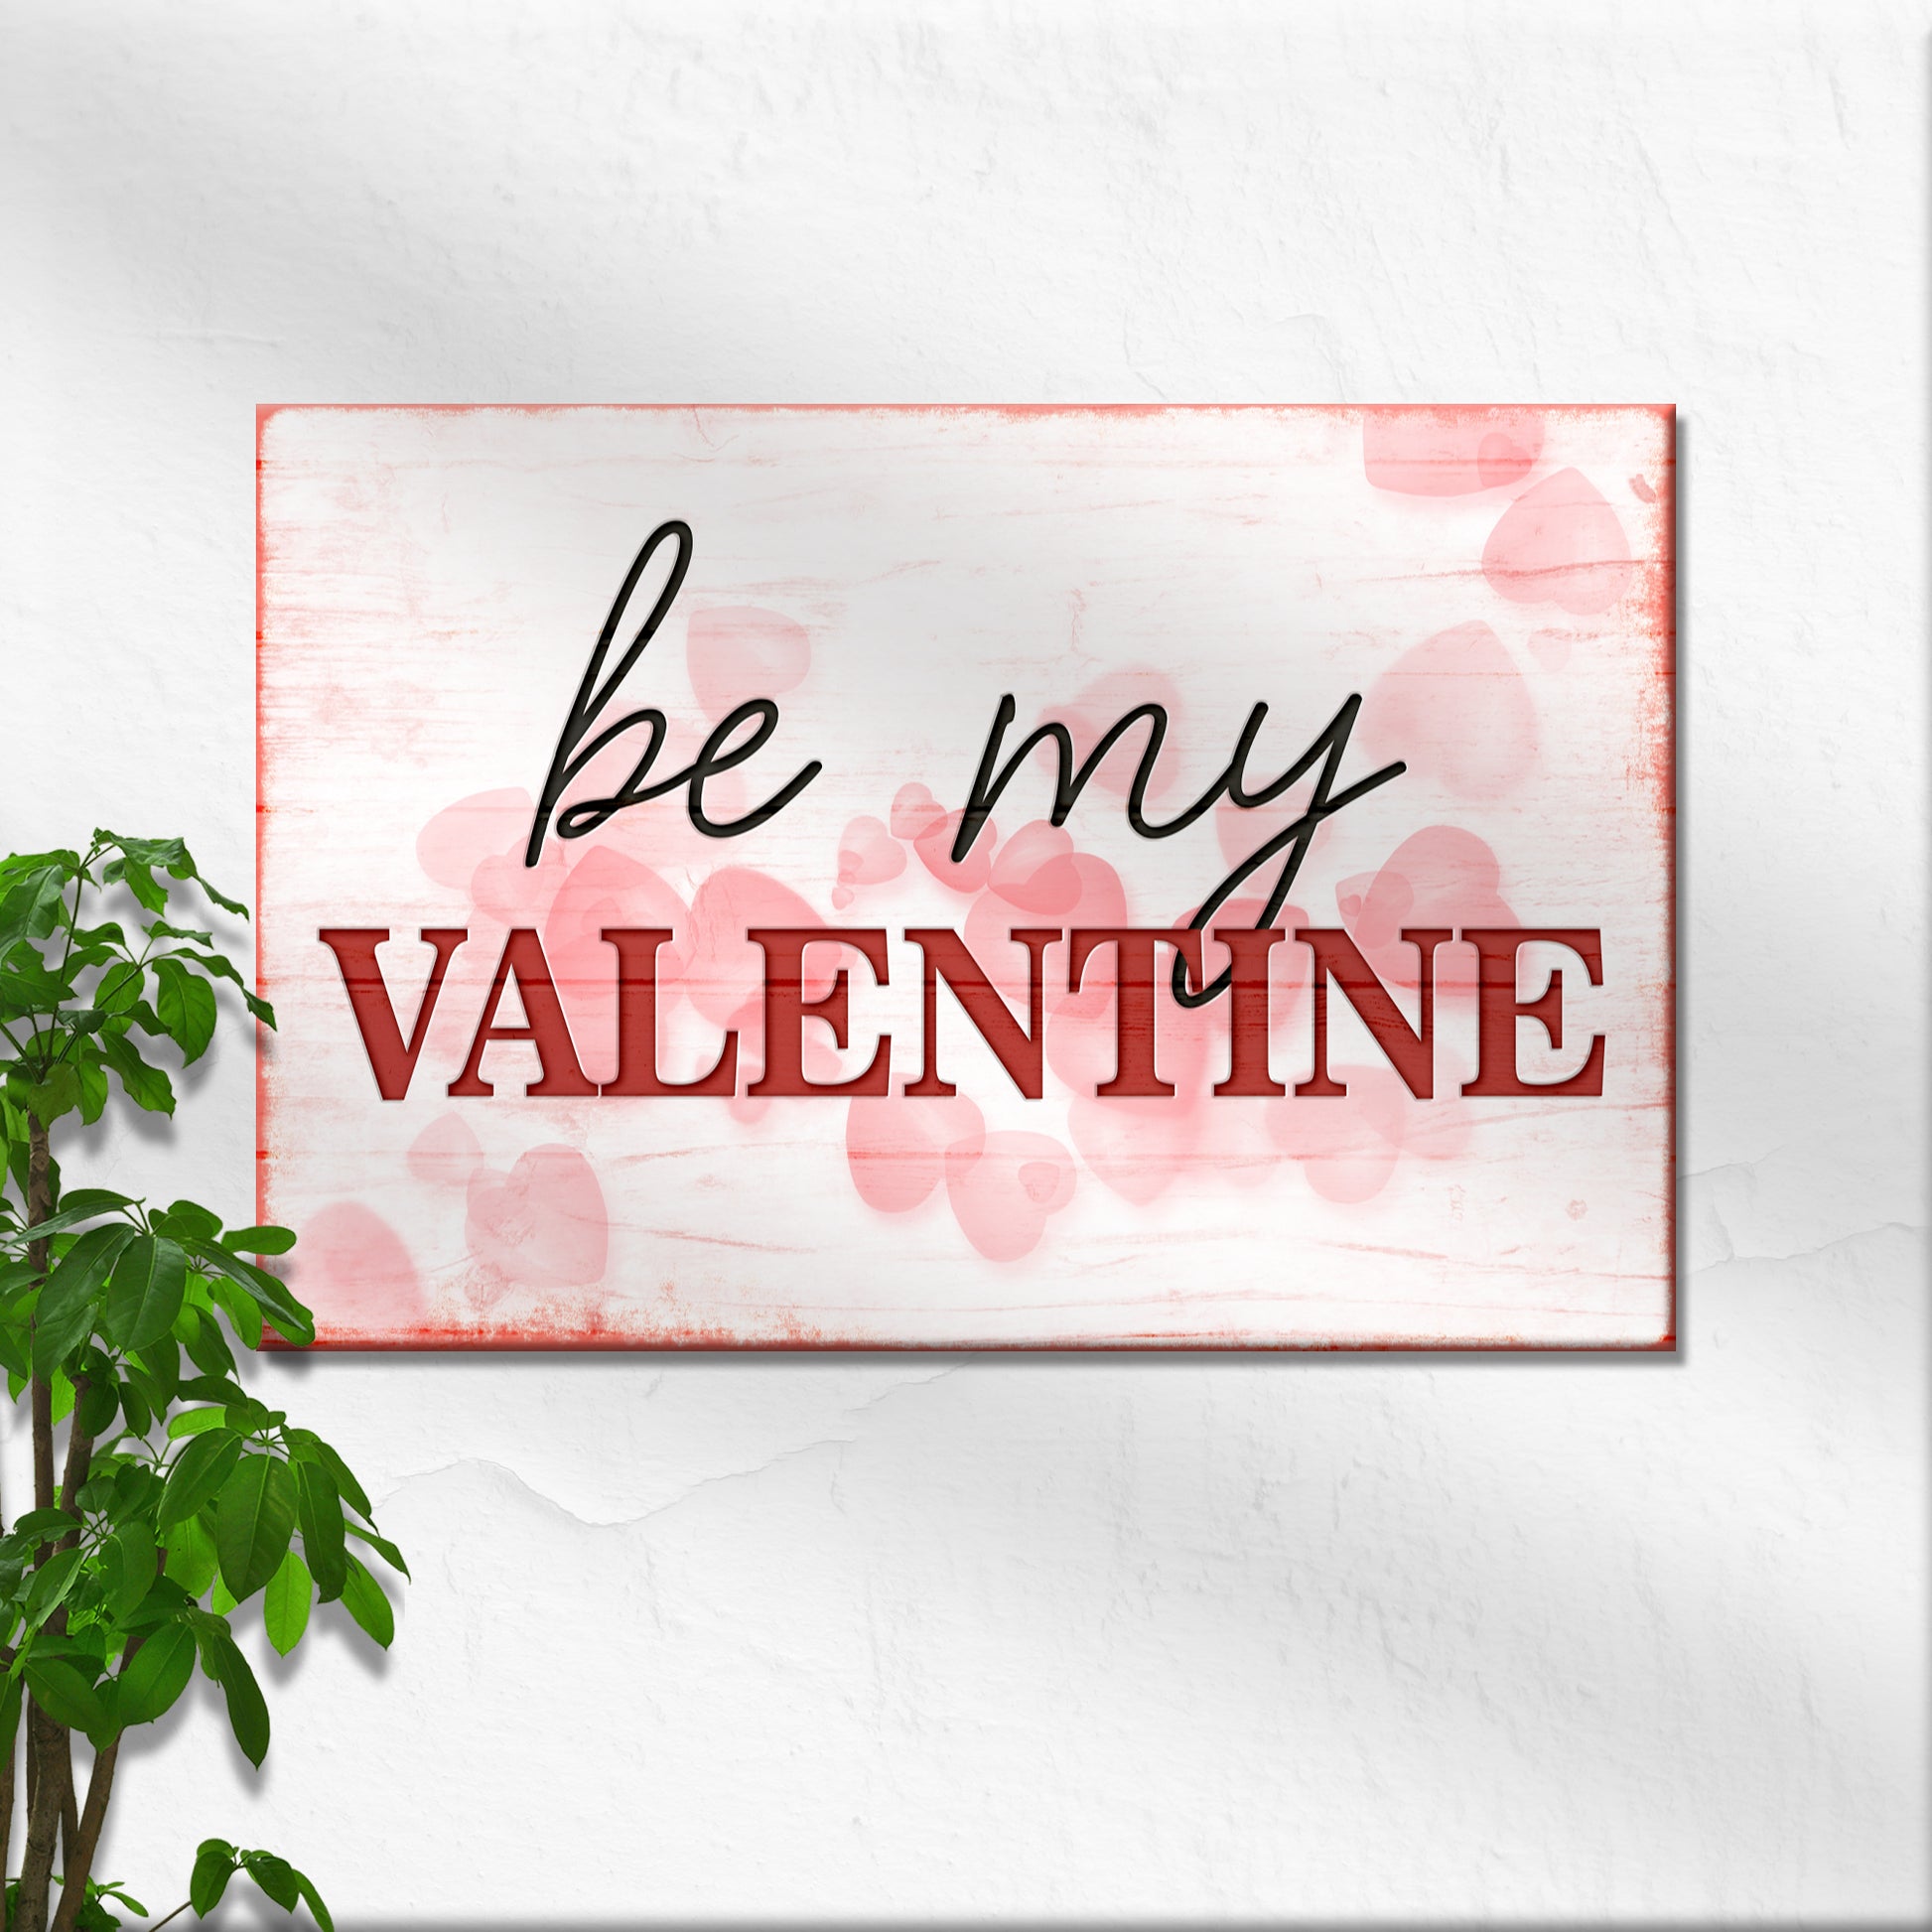 Be My Valentine Sign Style 1 - Image by Tailored Canvases